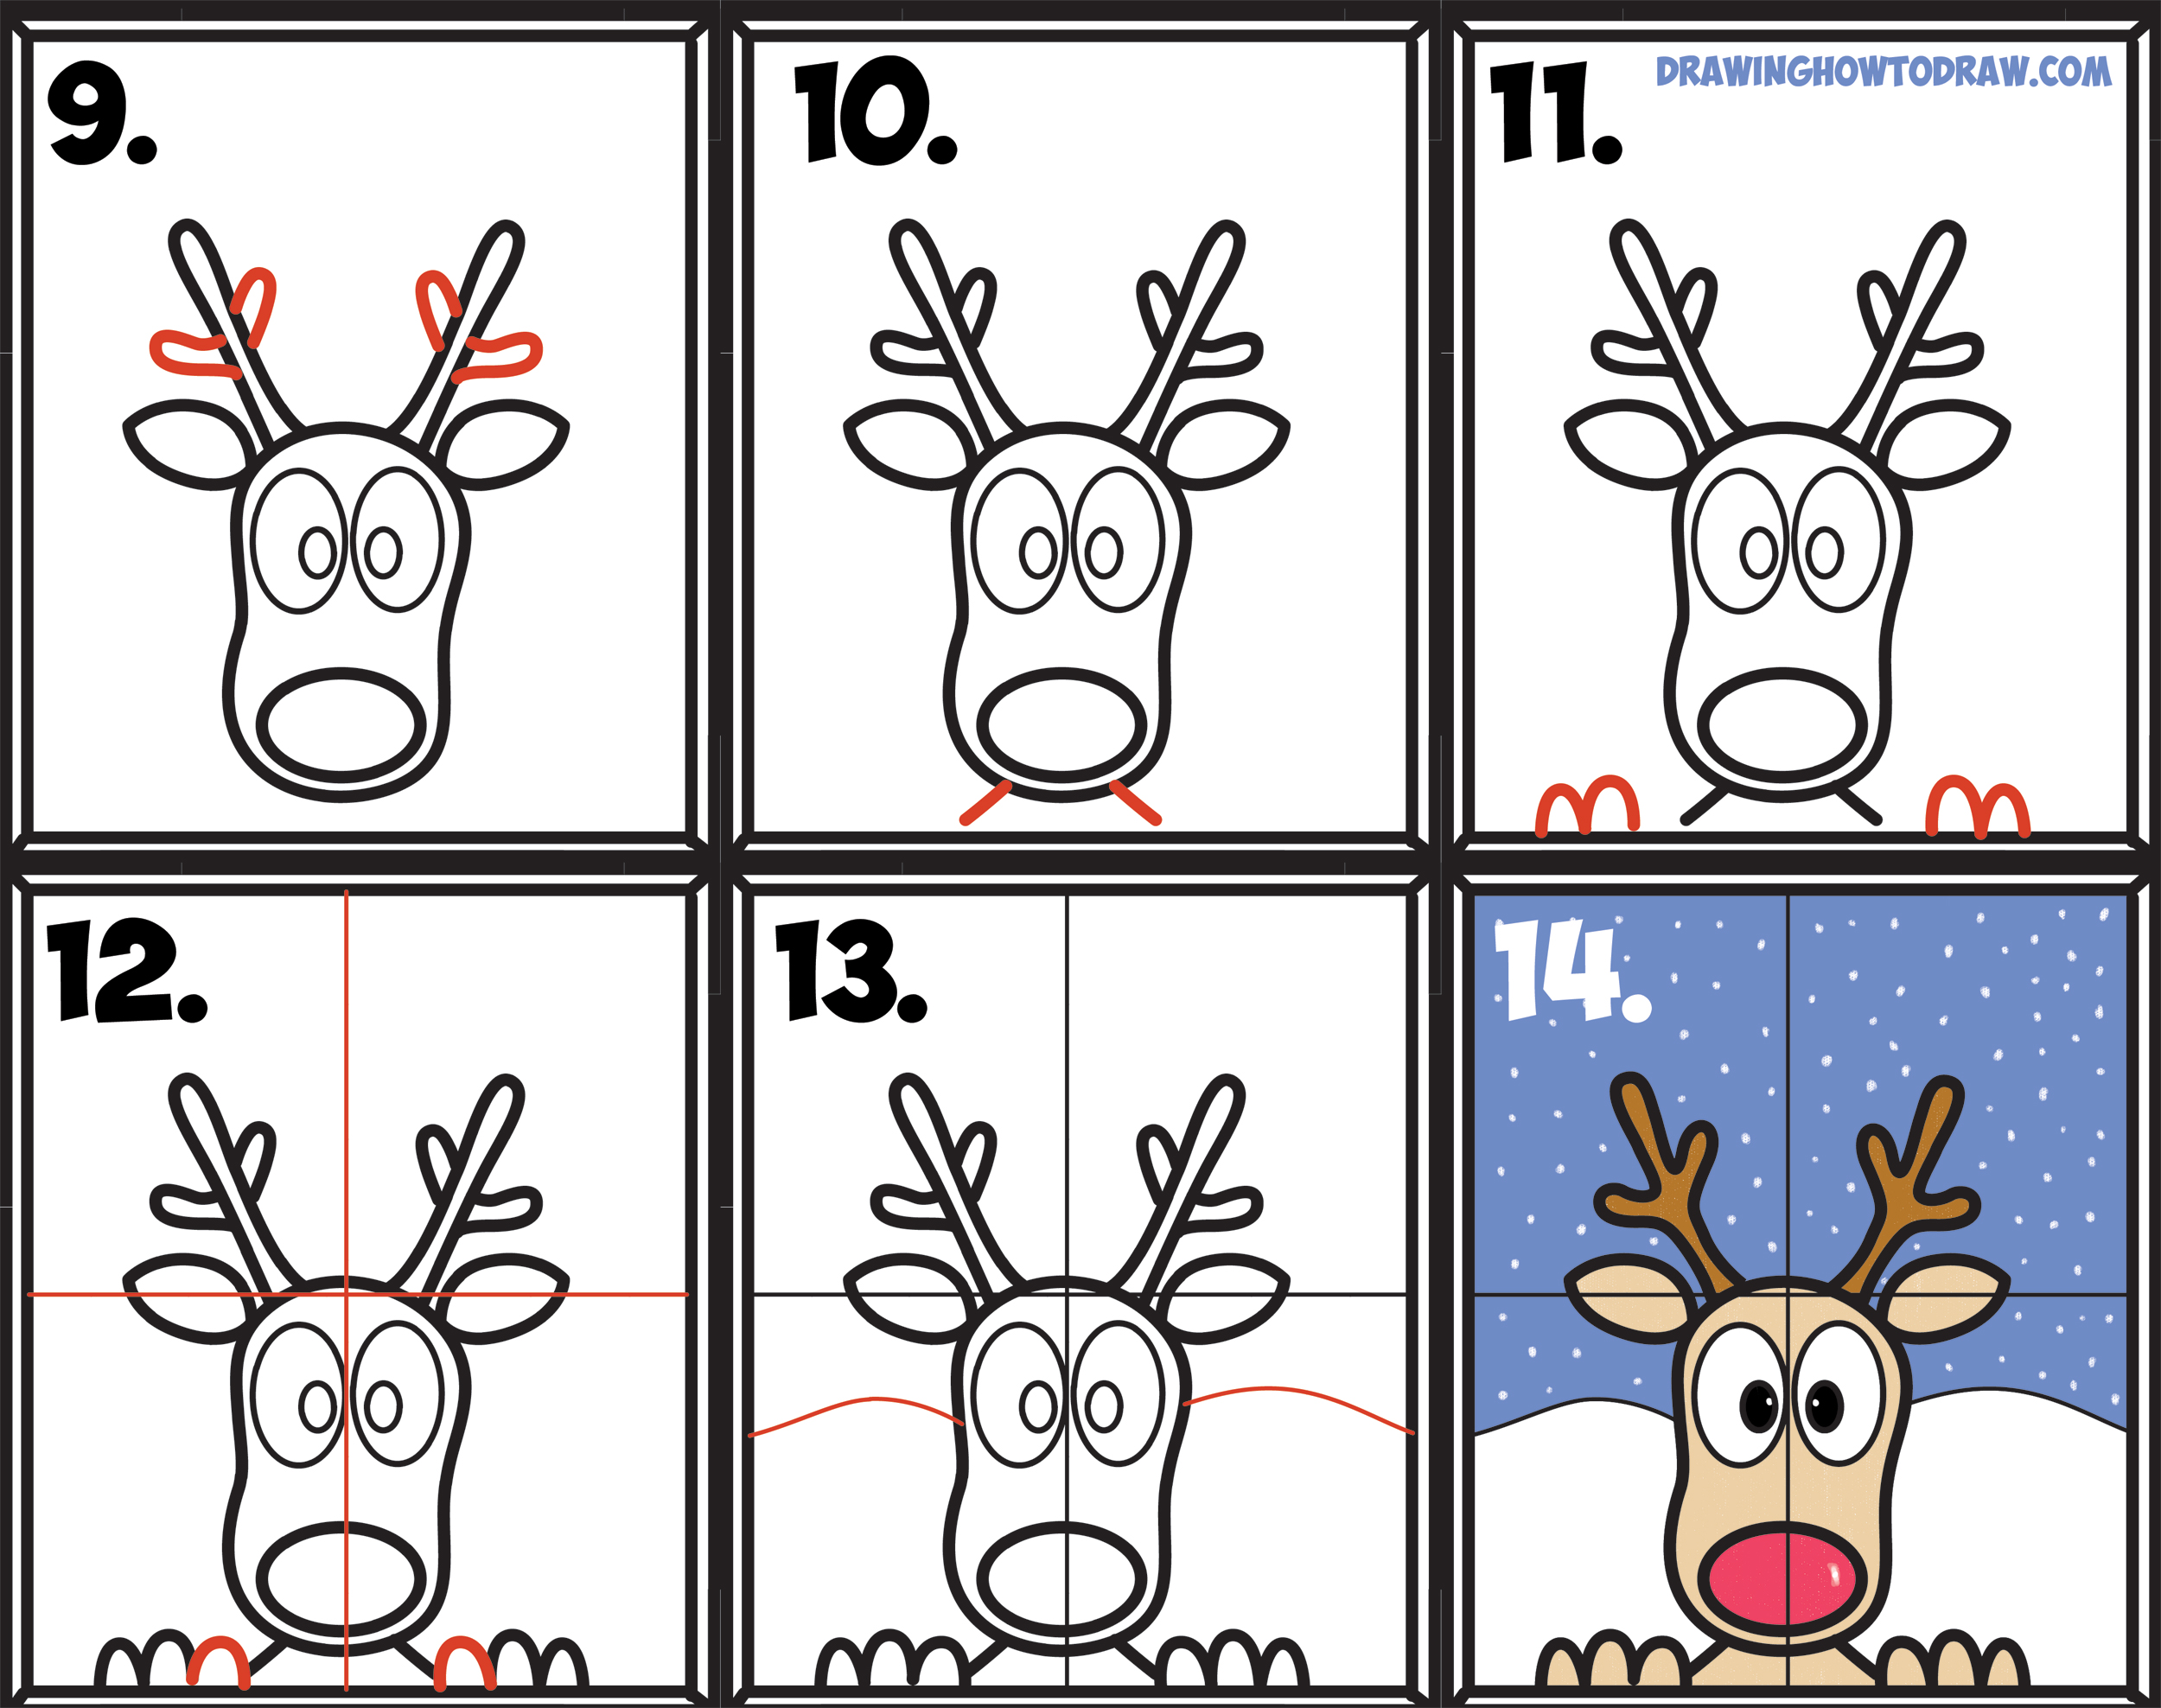 Learn How to Draw Rudolph the Red Nosed Reindeer Looking in Window Simple Steps Drawing and Art Lesson for Kids on Christmas